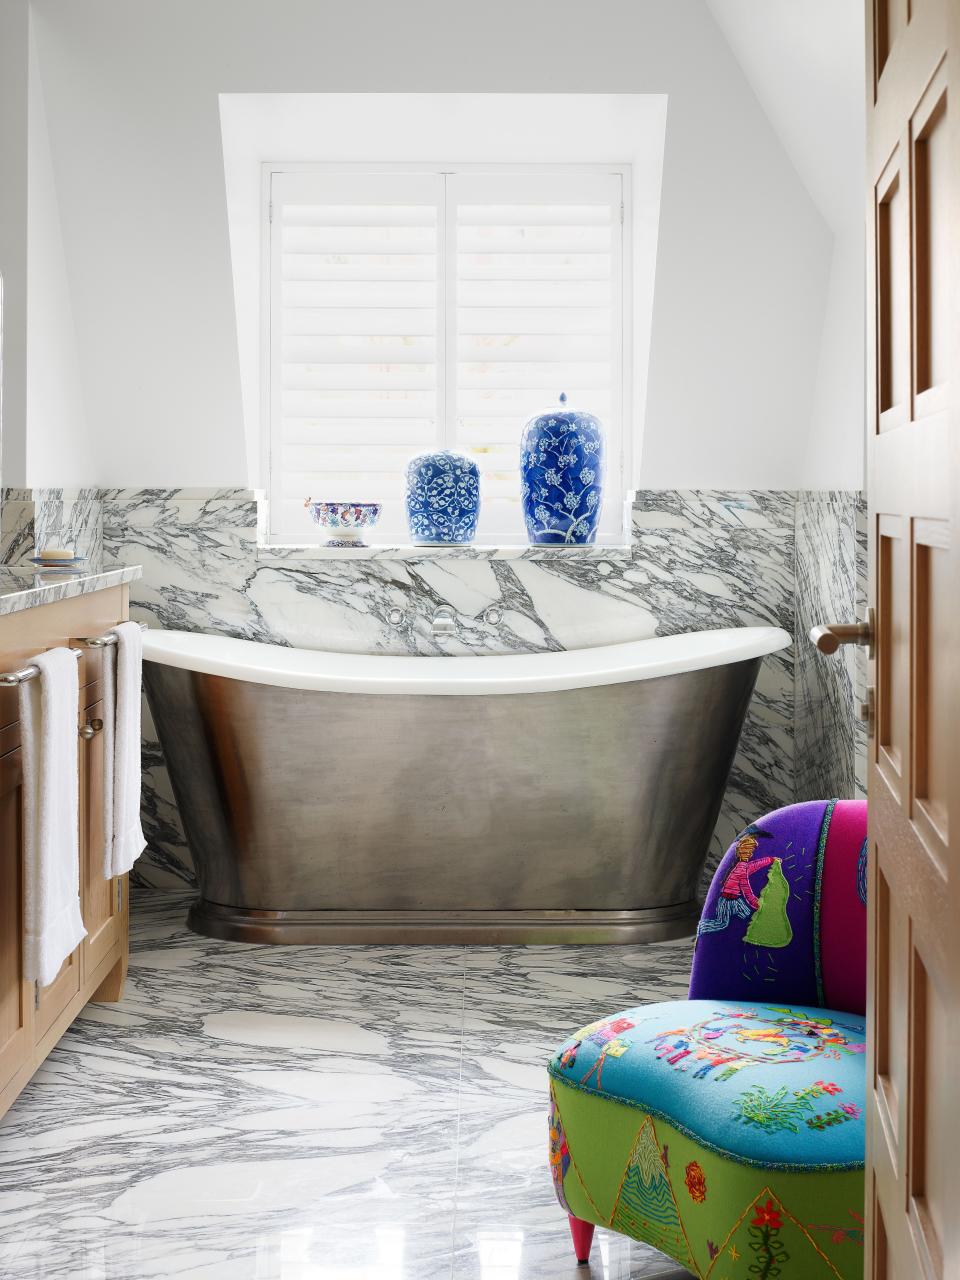 The master bath features a C.P. Hart tub. Embroidered chair by Minnie.